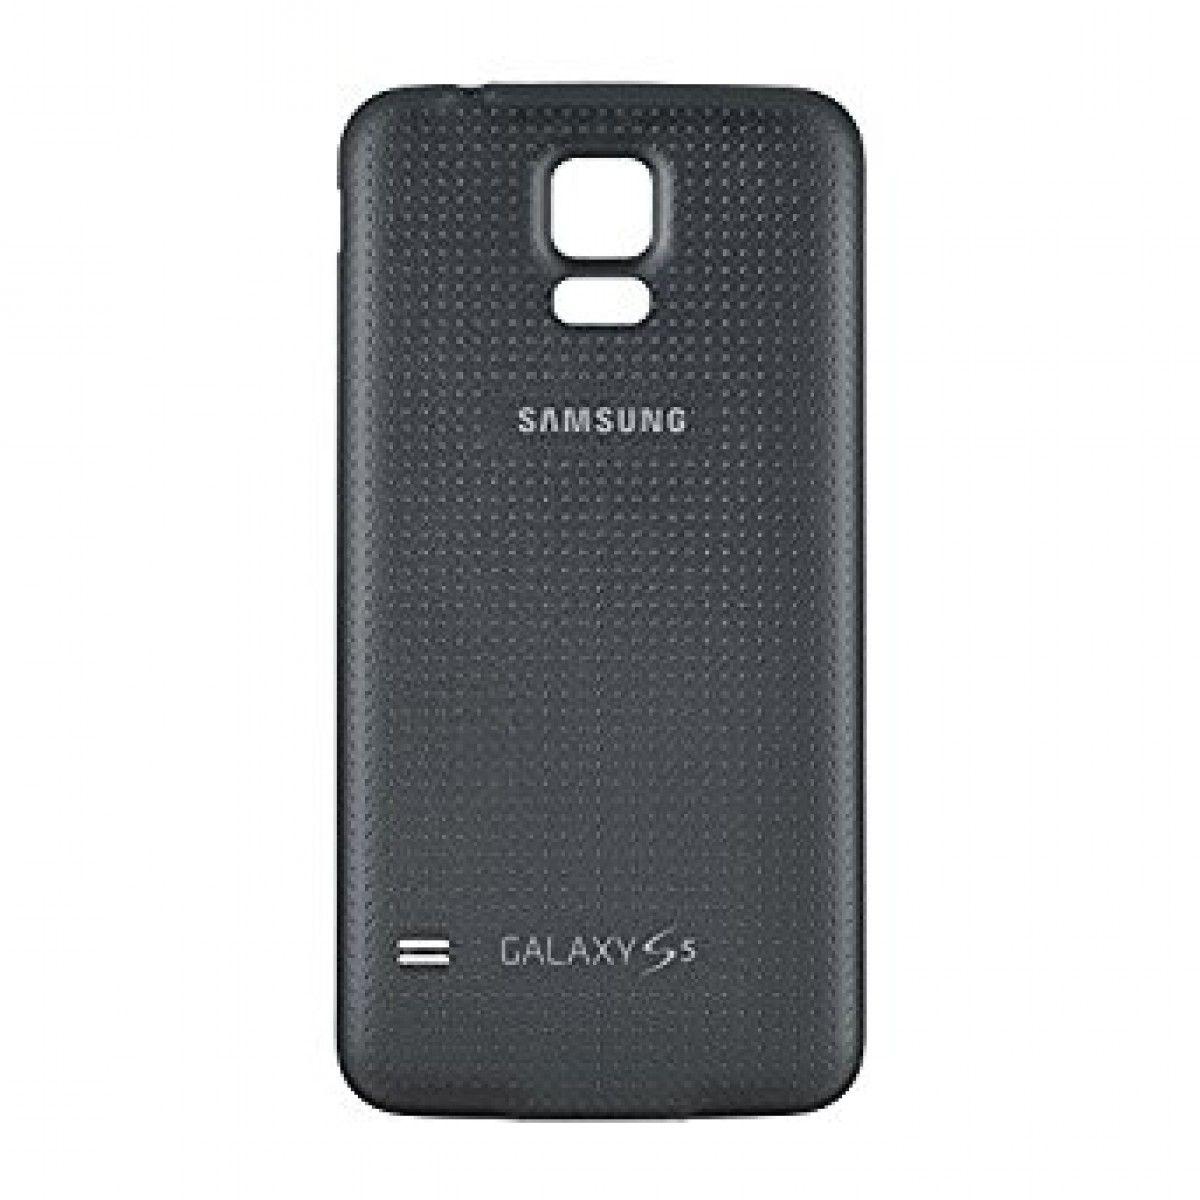 Welcome to Samsung Logo - OEM Samsung Galaxy S5 SM G900 Battery Door Back Cover Replacement